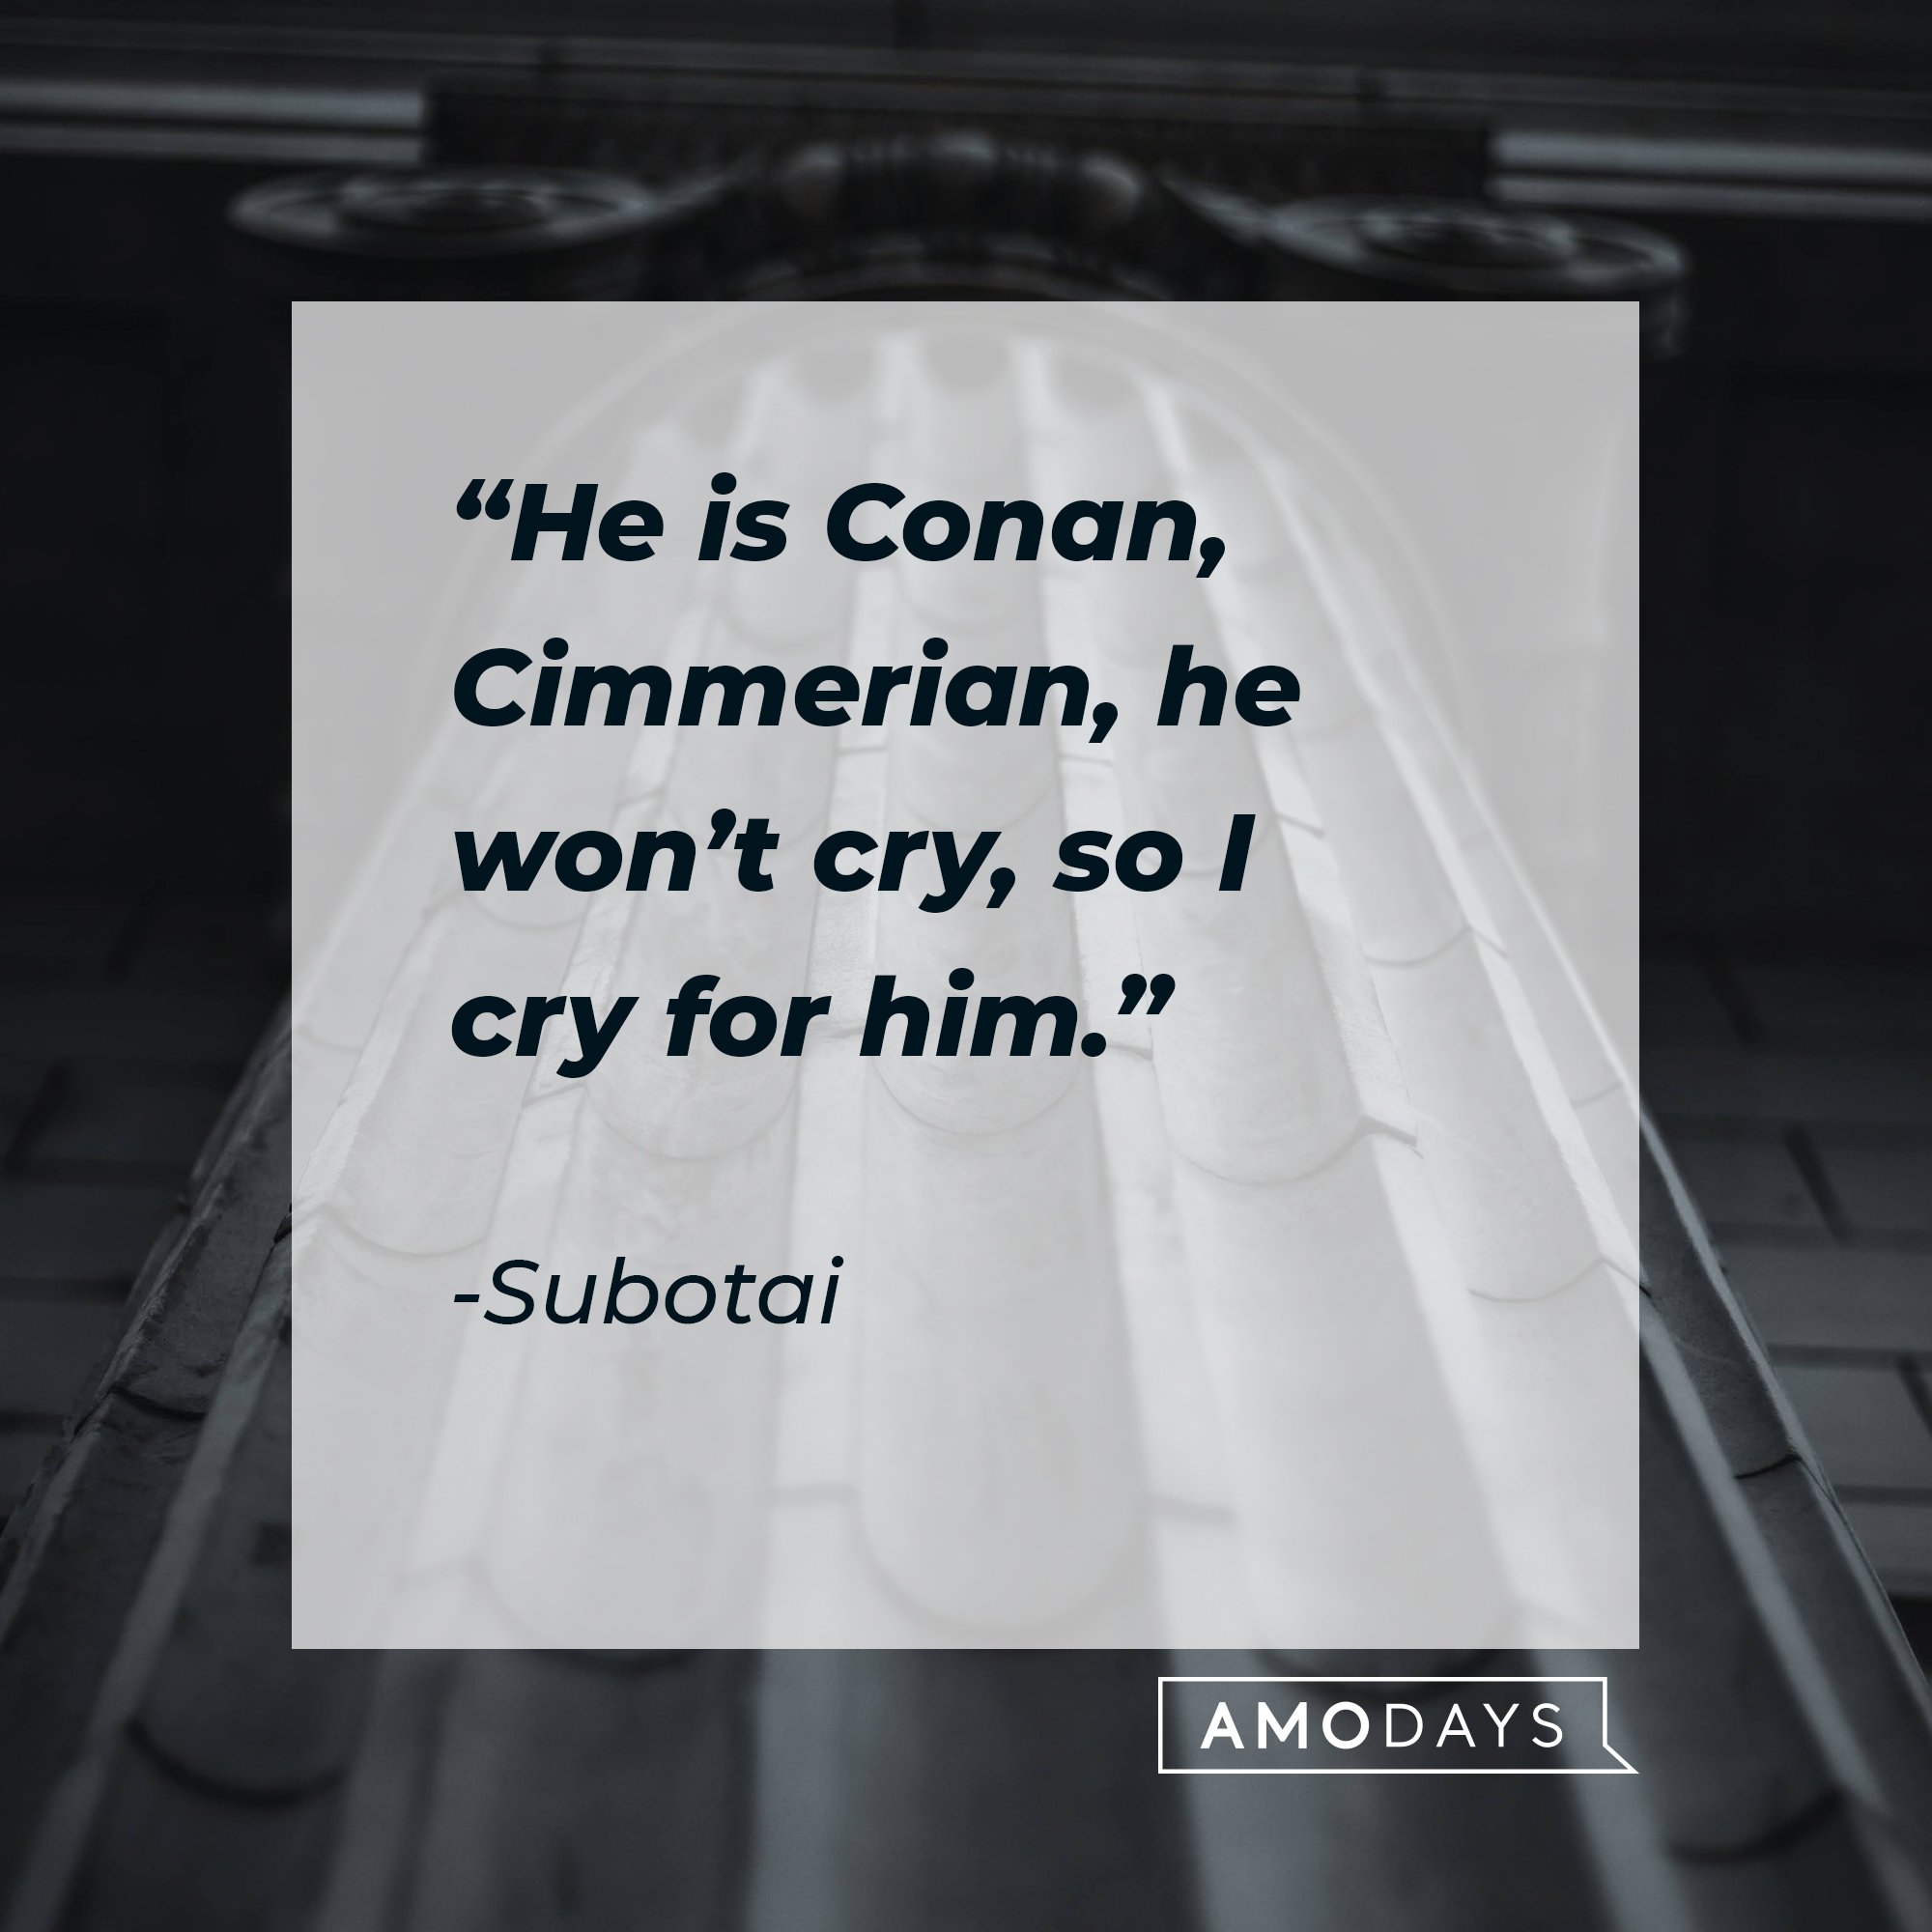  Subotai's quote: “He is Conan, Cimmerian, he won’t cry, so I cry for him.” | Image: AmoDays